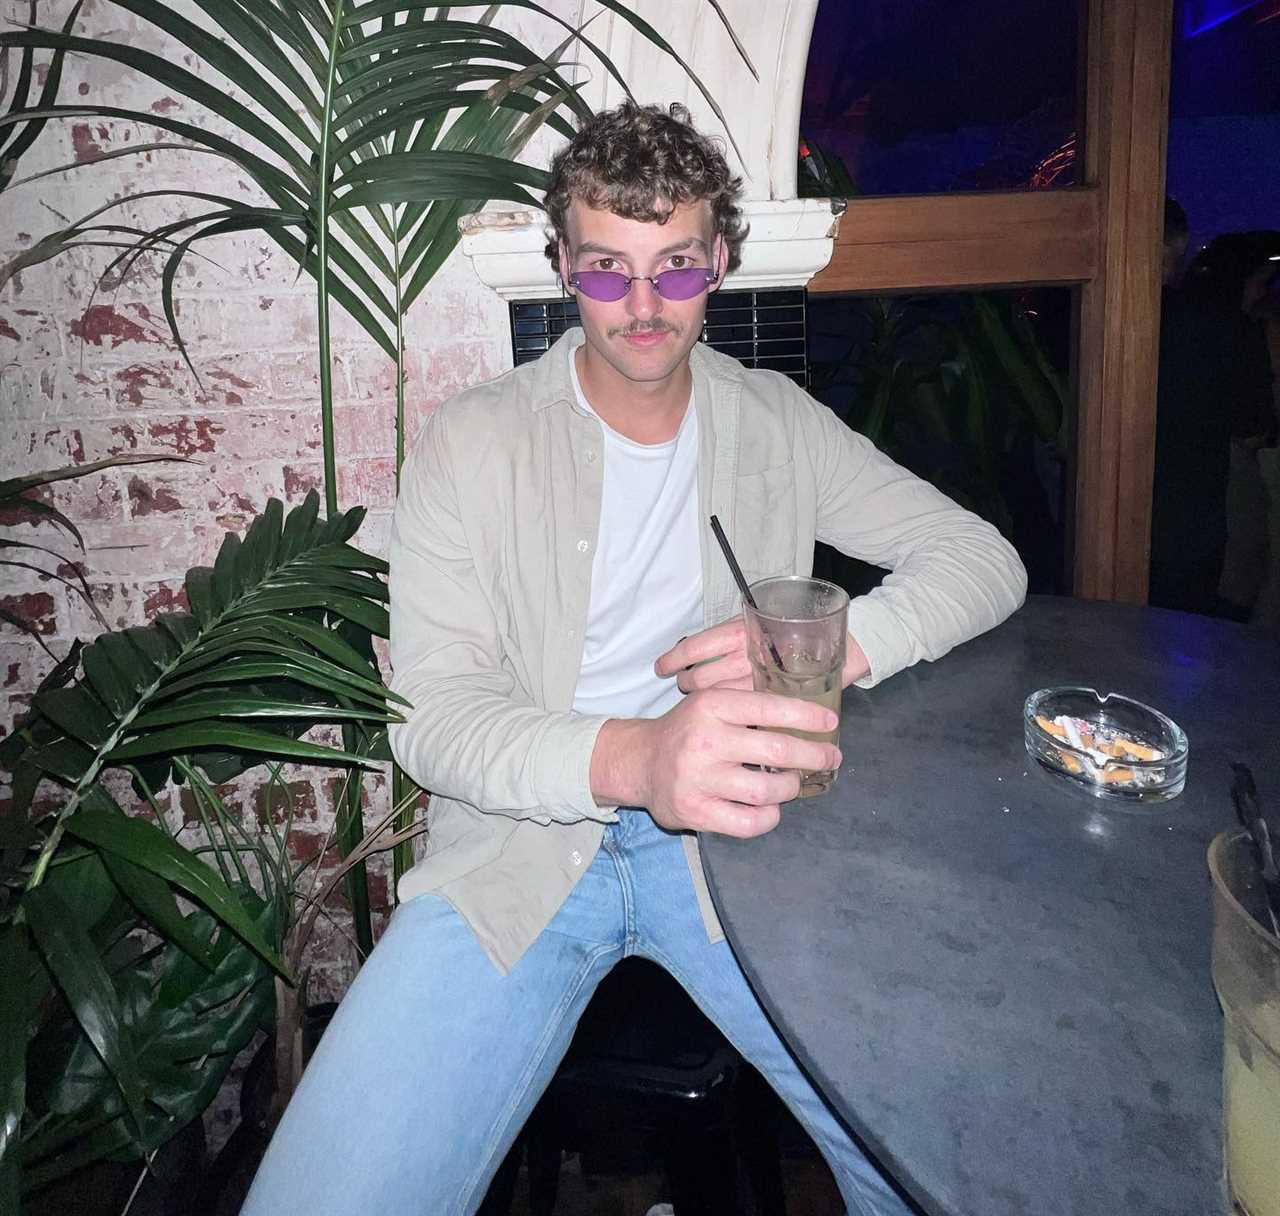 Love Island’s Hugo Hammond shows off dramatic new look after moving to Australia